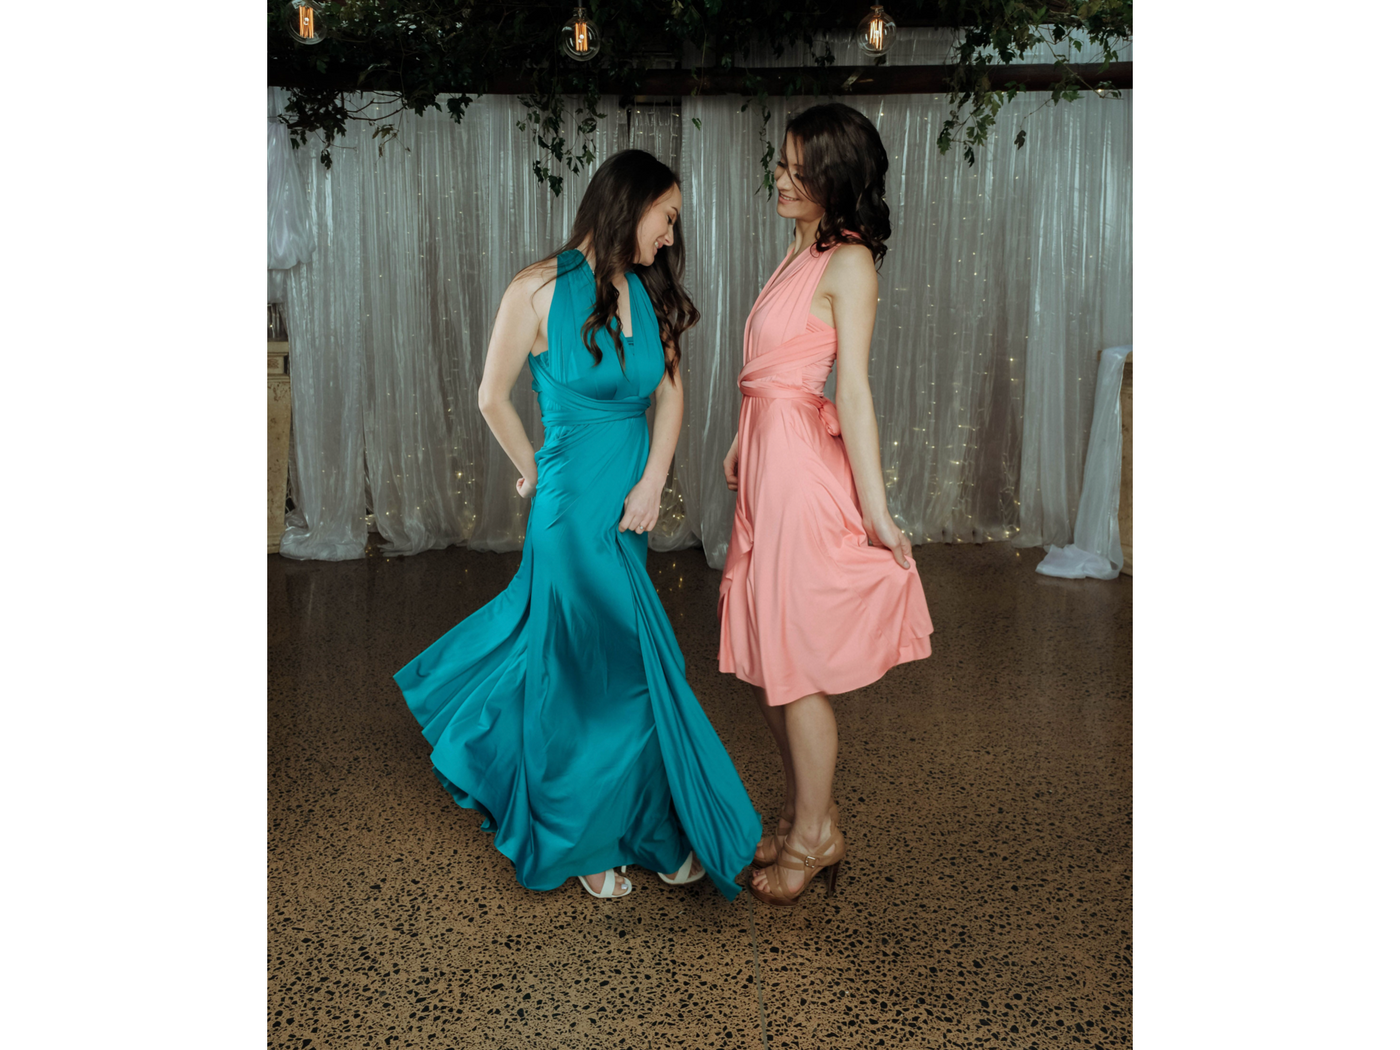  Teal - Deluxe Infinity Stylish & Stunning Dress - Wedding Apparel by WA Bridal sold by WA Bridal 